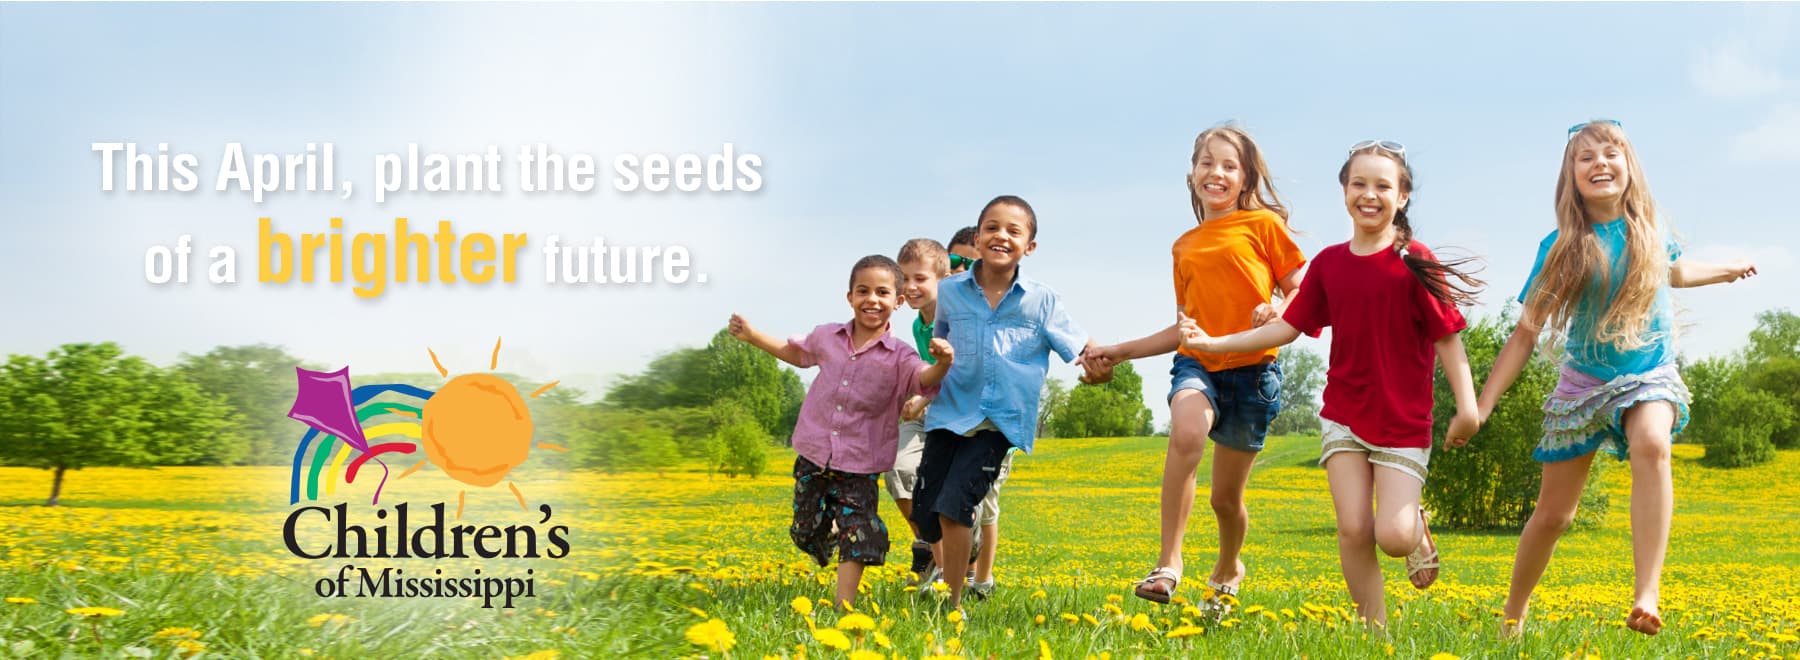 Diverse group of children running through field laughing with the message - This April, plant the seeds of a brighter future.